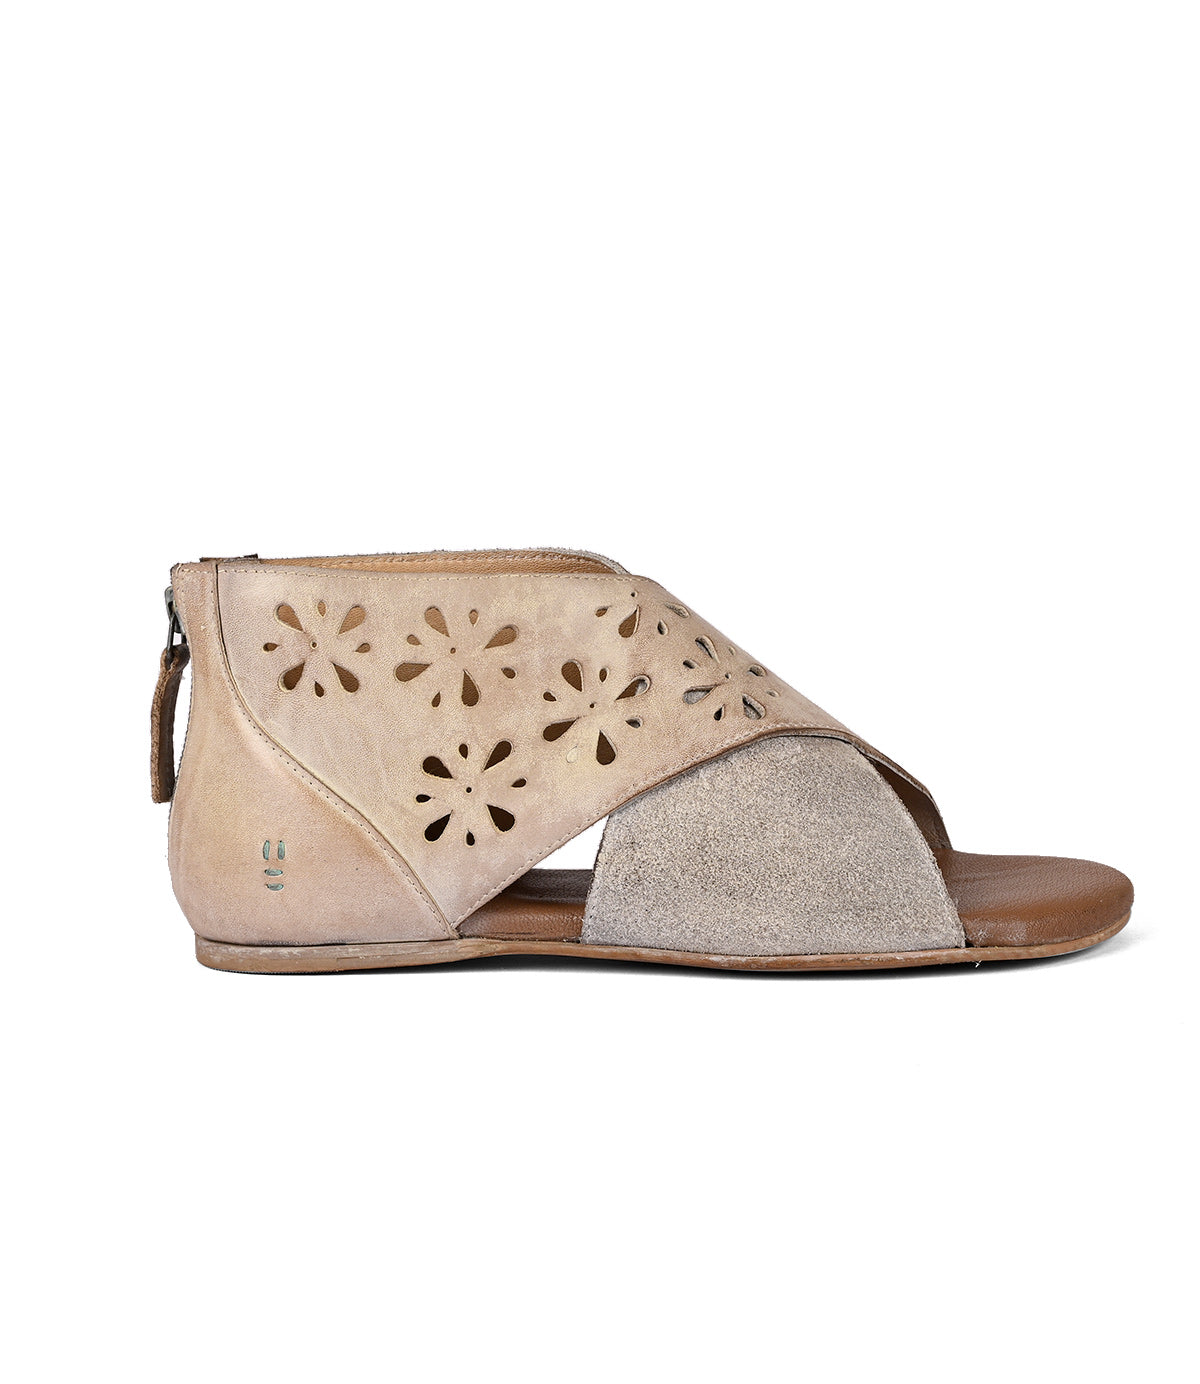 Beige women's flat sandal with laser-cut designs and a zip closure at the heel, displayed against a white background by Roan in the Rotation style.